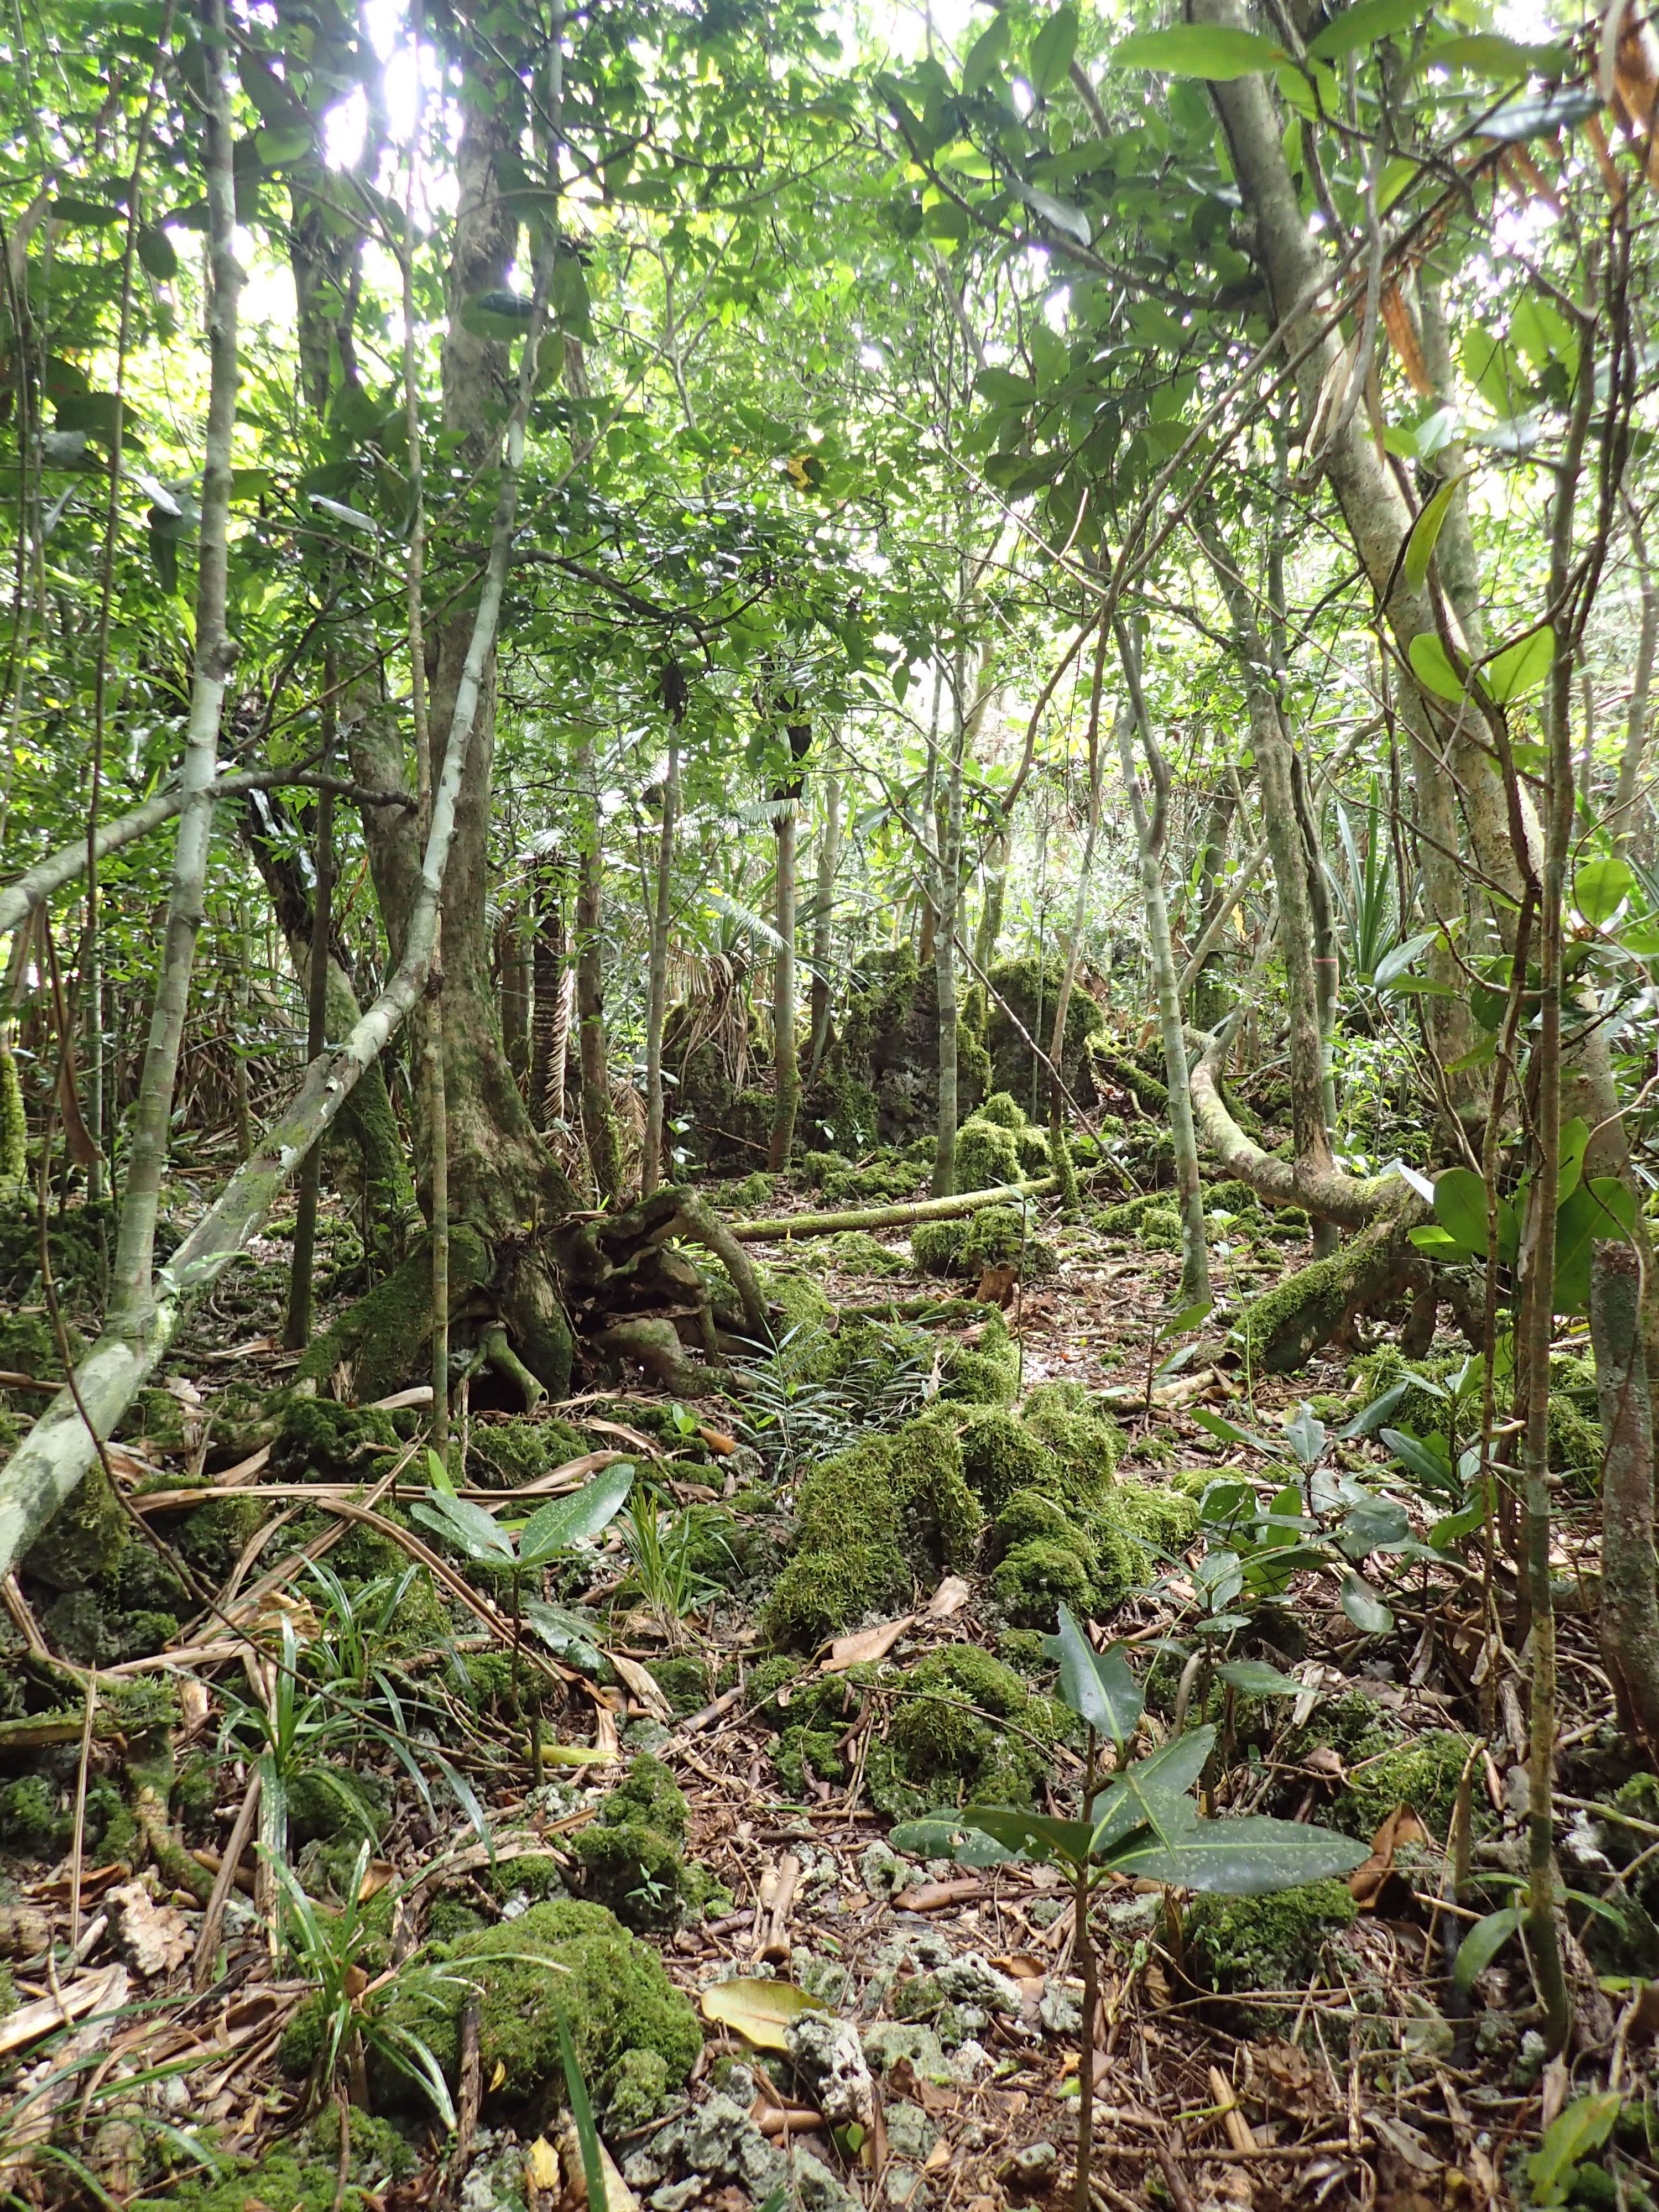 A typical limestone karst forest at one of the lab